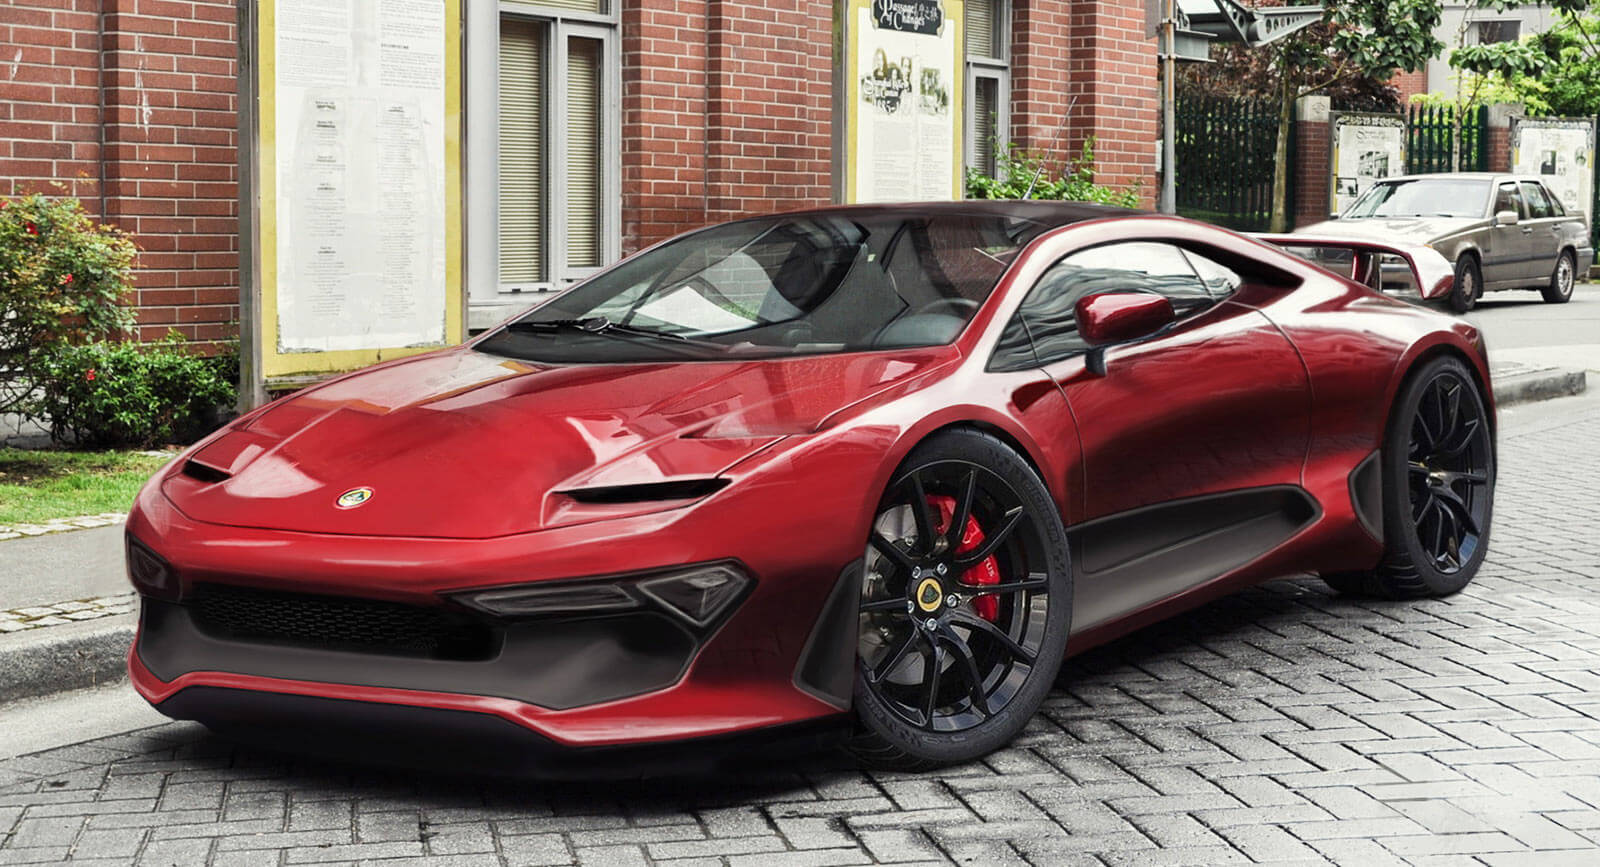 New Lotus Esprit Study Envisions The Brand's 2020 Flagship Supercar |  Carscoops